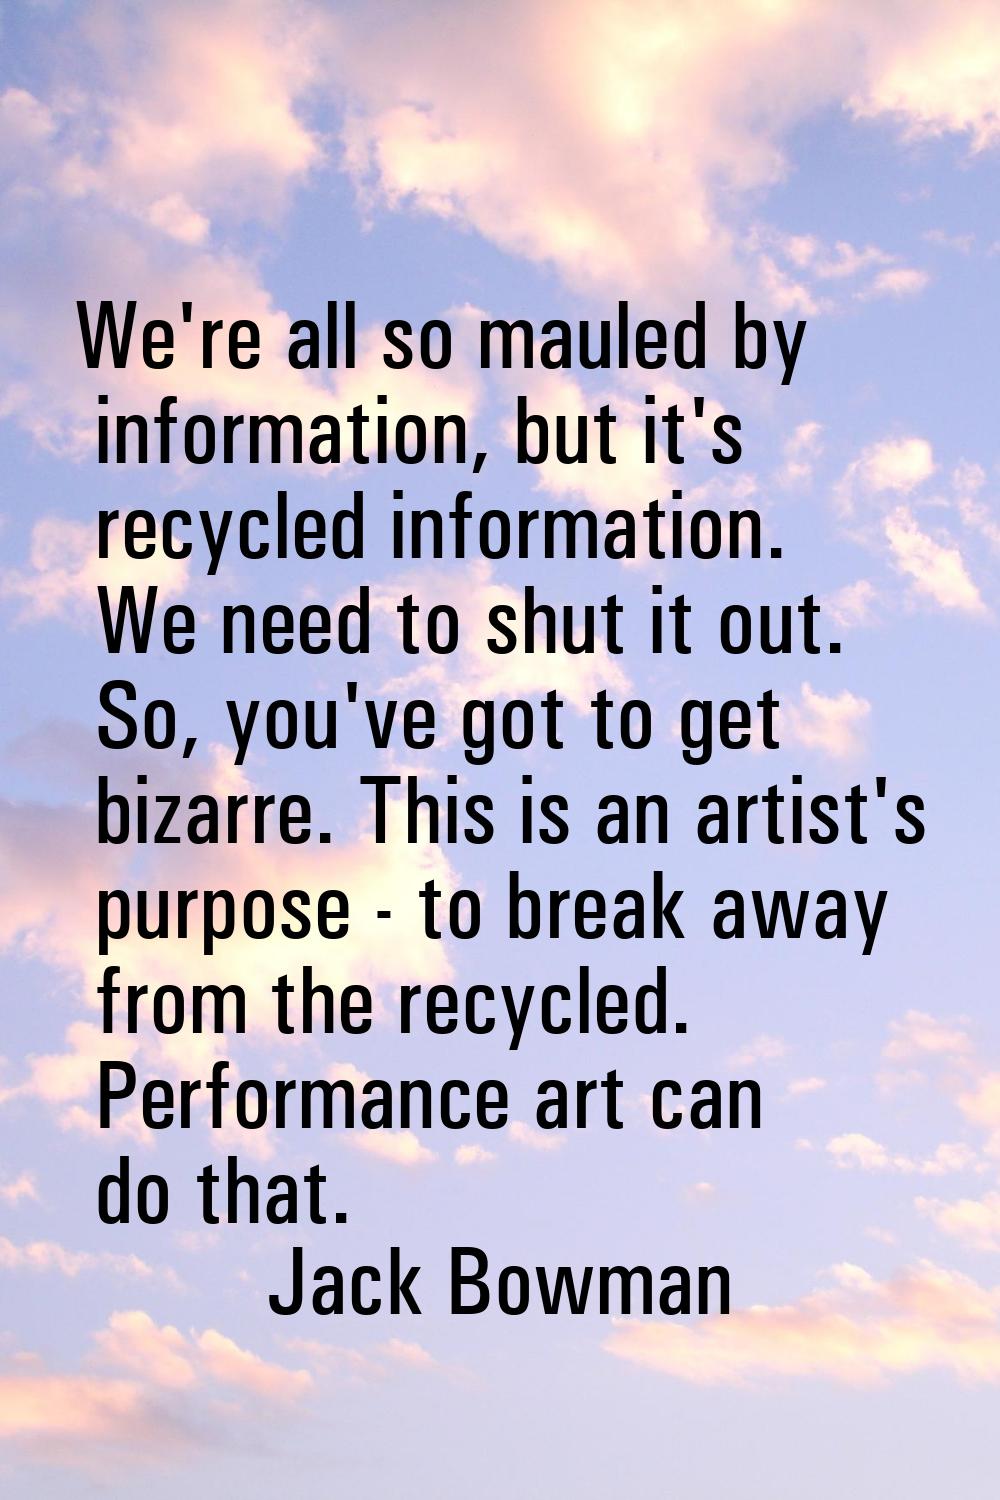 We're all so mauled by information, but it's recycled information. We need to shut it out. So, you'